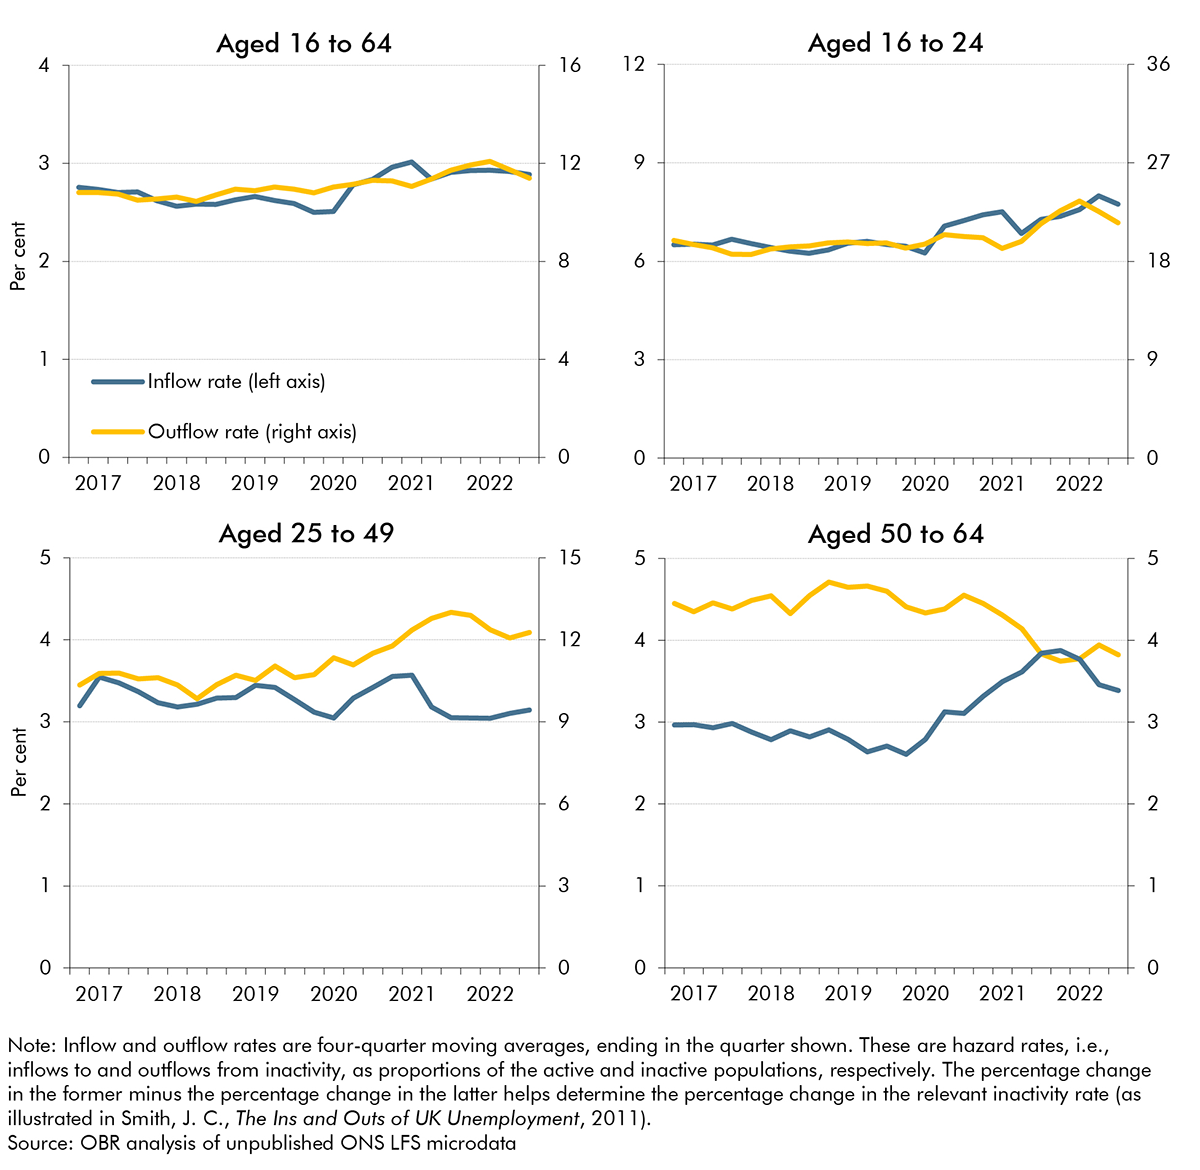 Chart D: Inflow and outflow rates to and from inactivity by age group